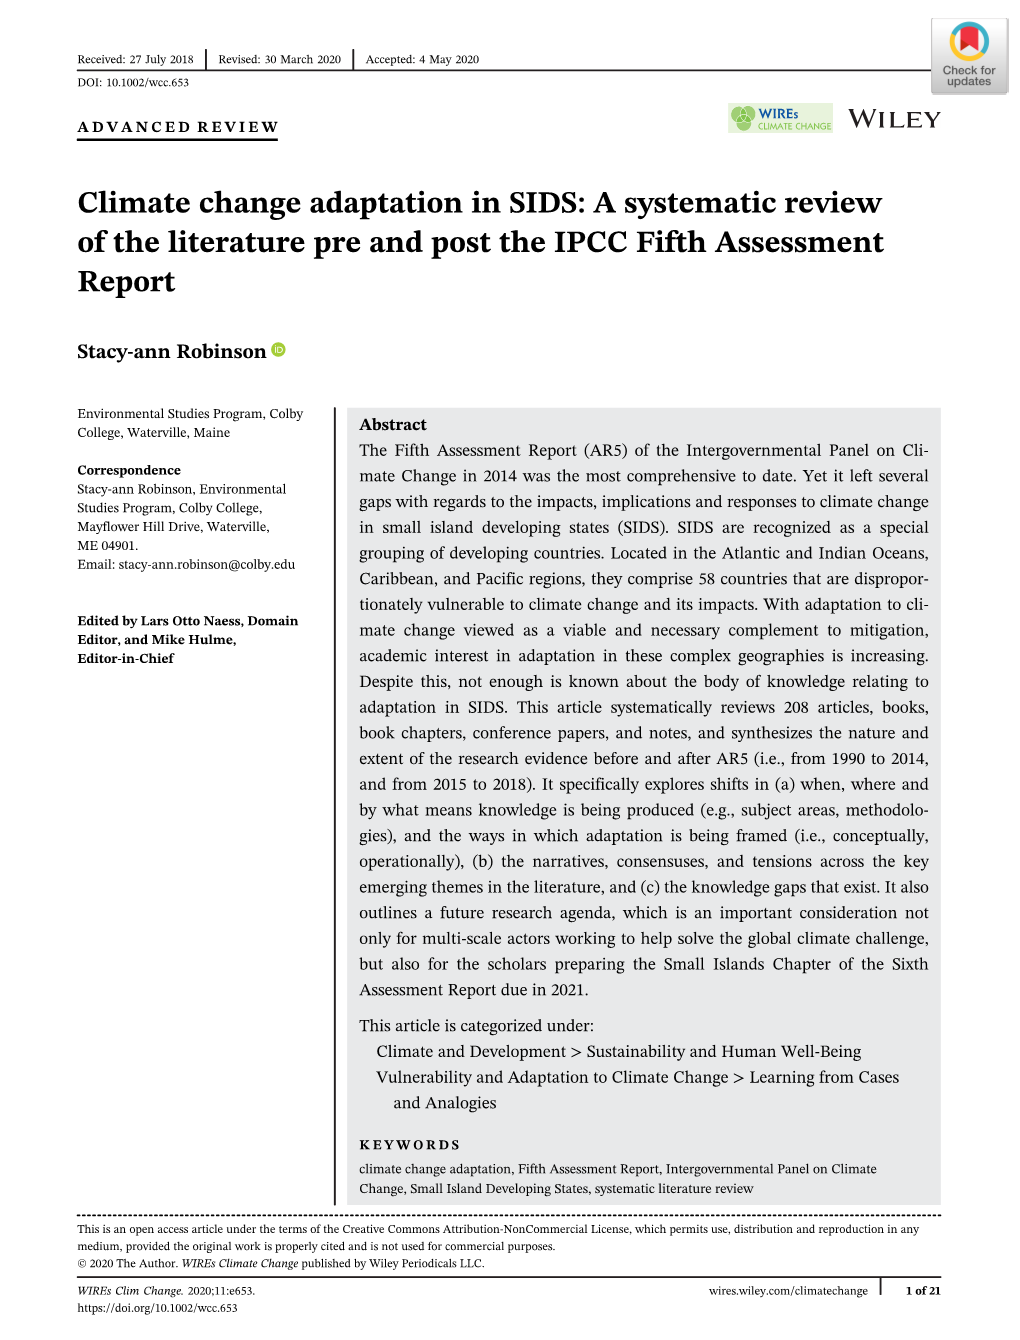 Climate Change Adaptation in SIDS: a Systematic Review of the Literature Pre and Post the IPCC Fifth Assessment Report